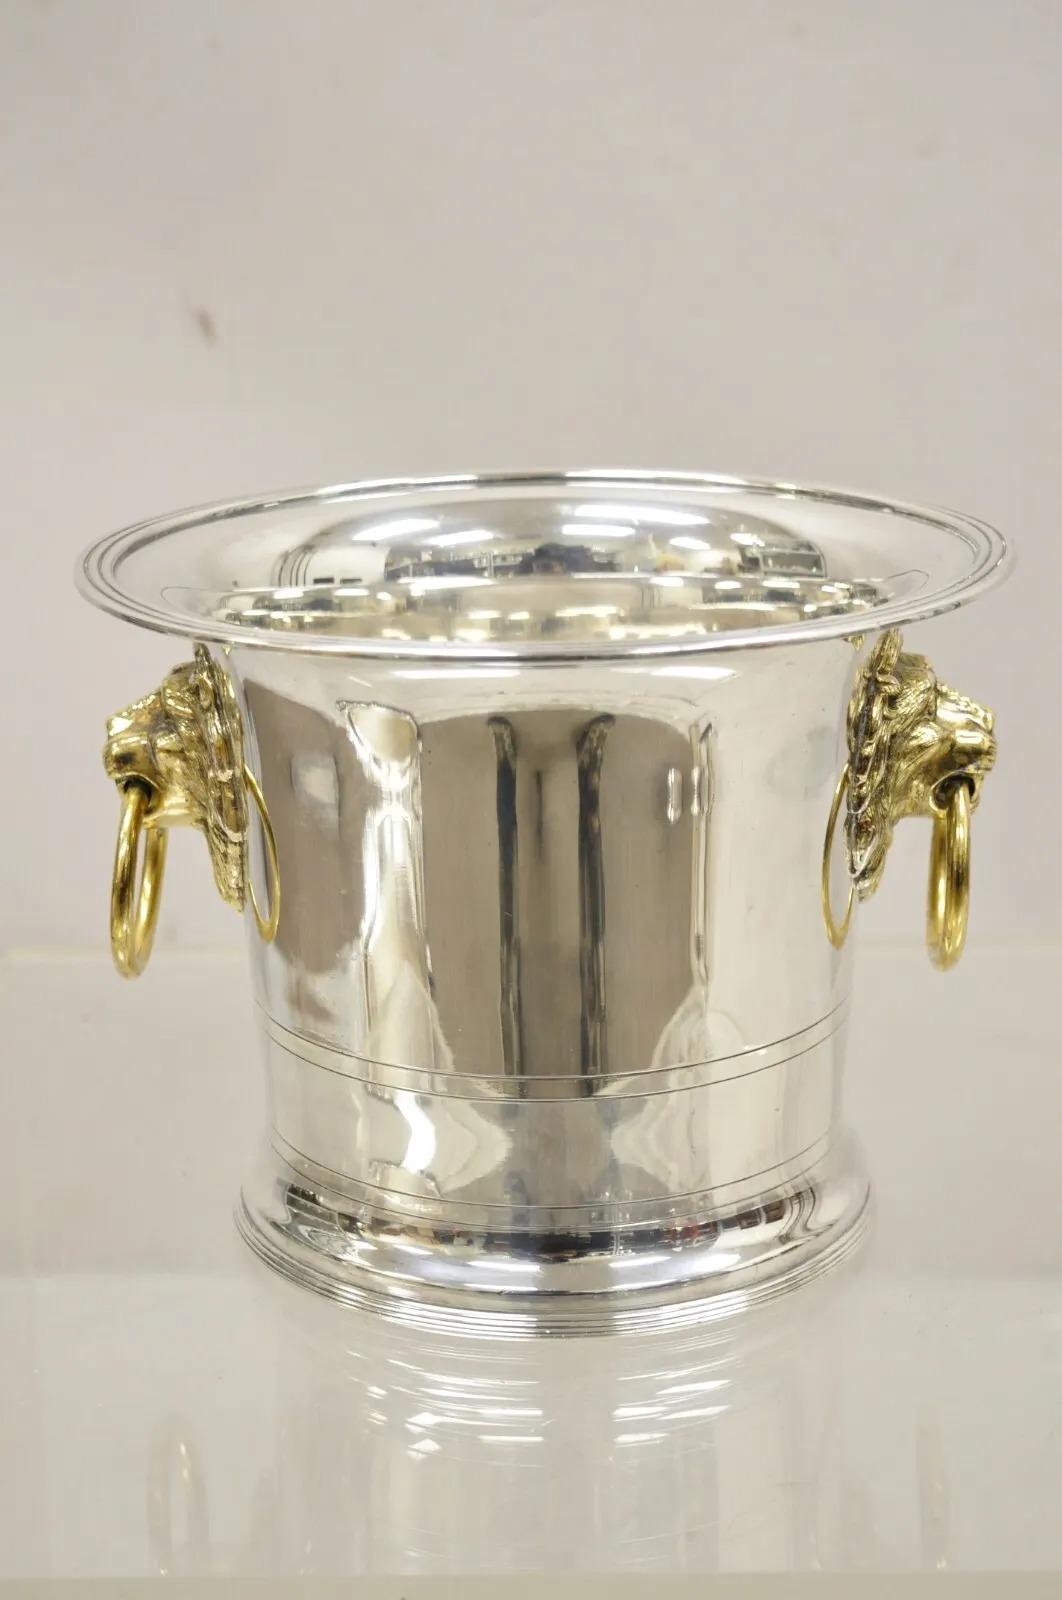 The Franklin Mint 1986 Silver Plated Fluted Champagne Chiller Lion Ice Bucket. Item features a brass lion head drop pulls, original hallmark. Circa 1986. Measurements: 7